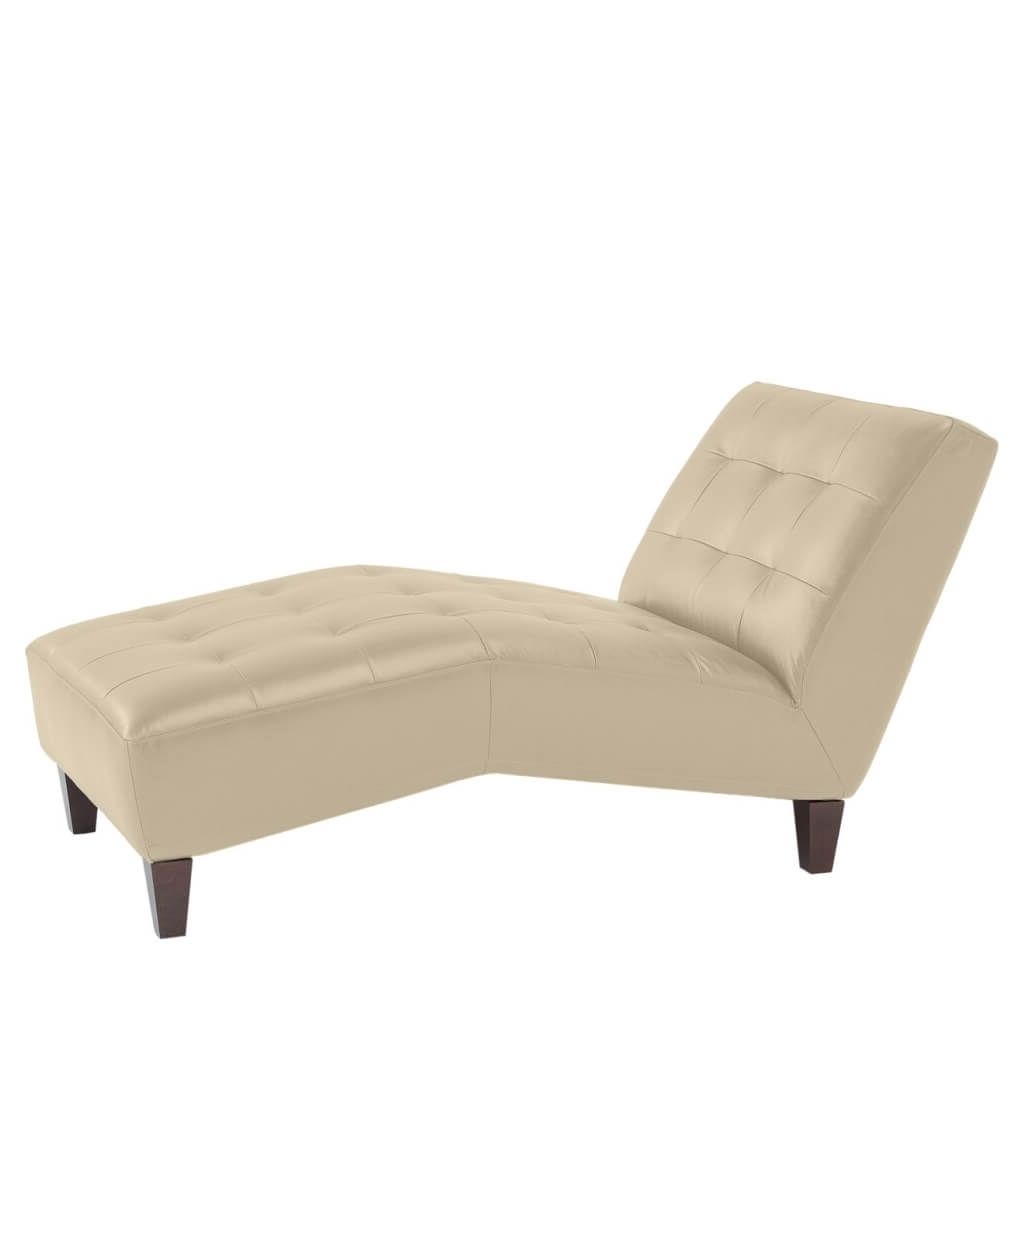 Furniture: Tufted Chaise Ideas For Your Living Room Furniture For Fashionable Alessia Chaise Lounge Tufted Chairs (View 10 of 15)